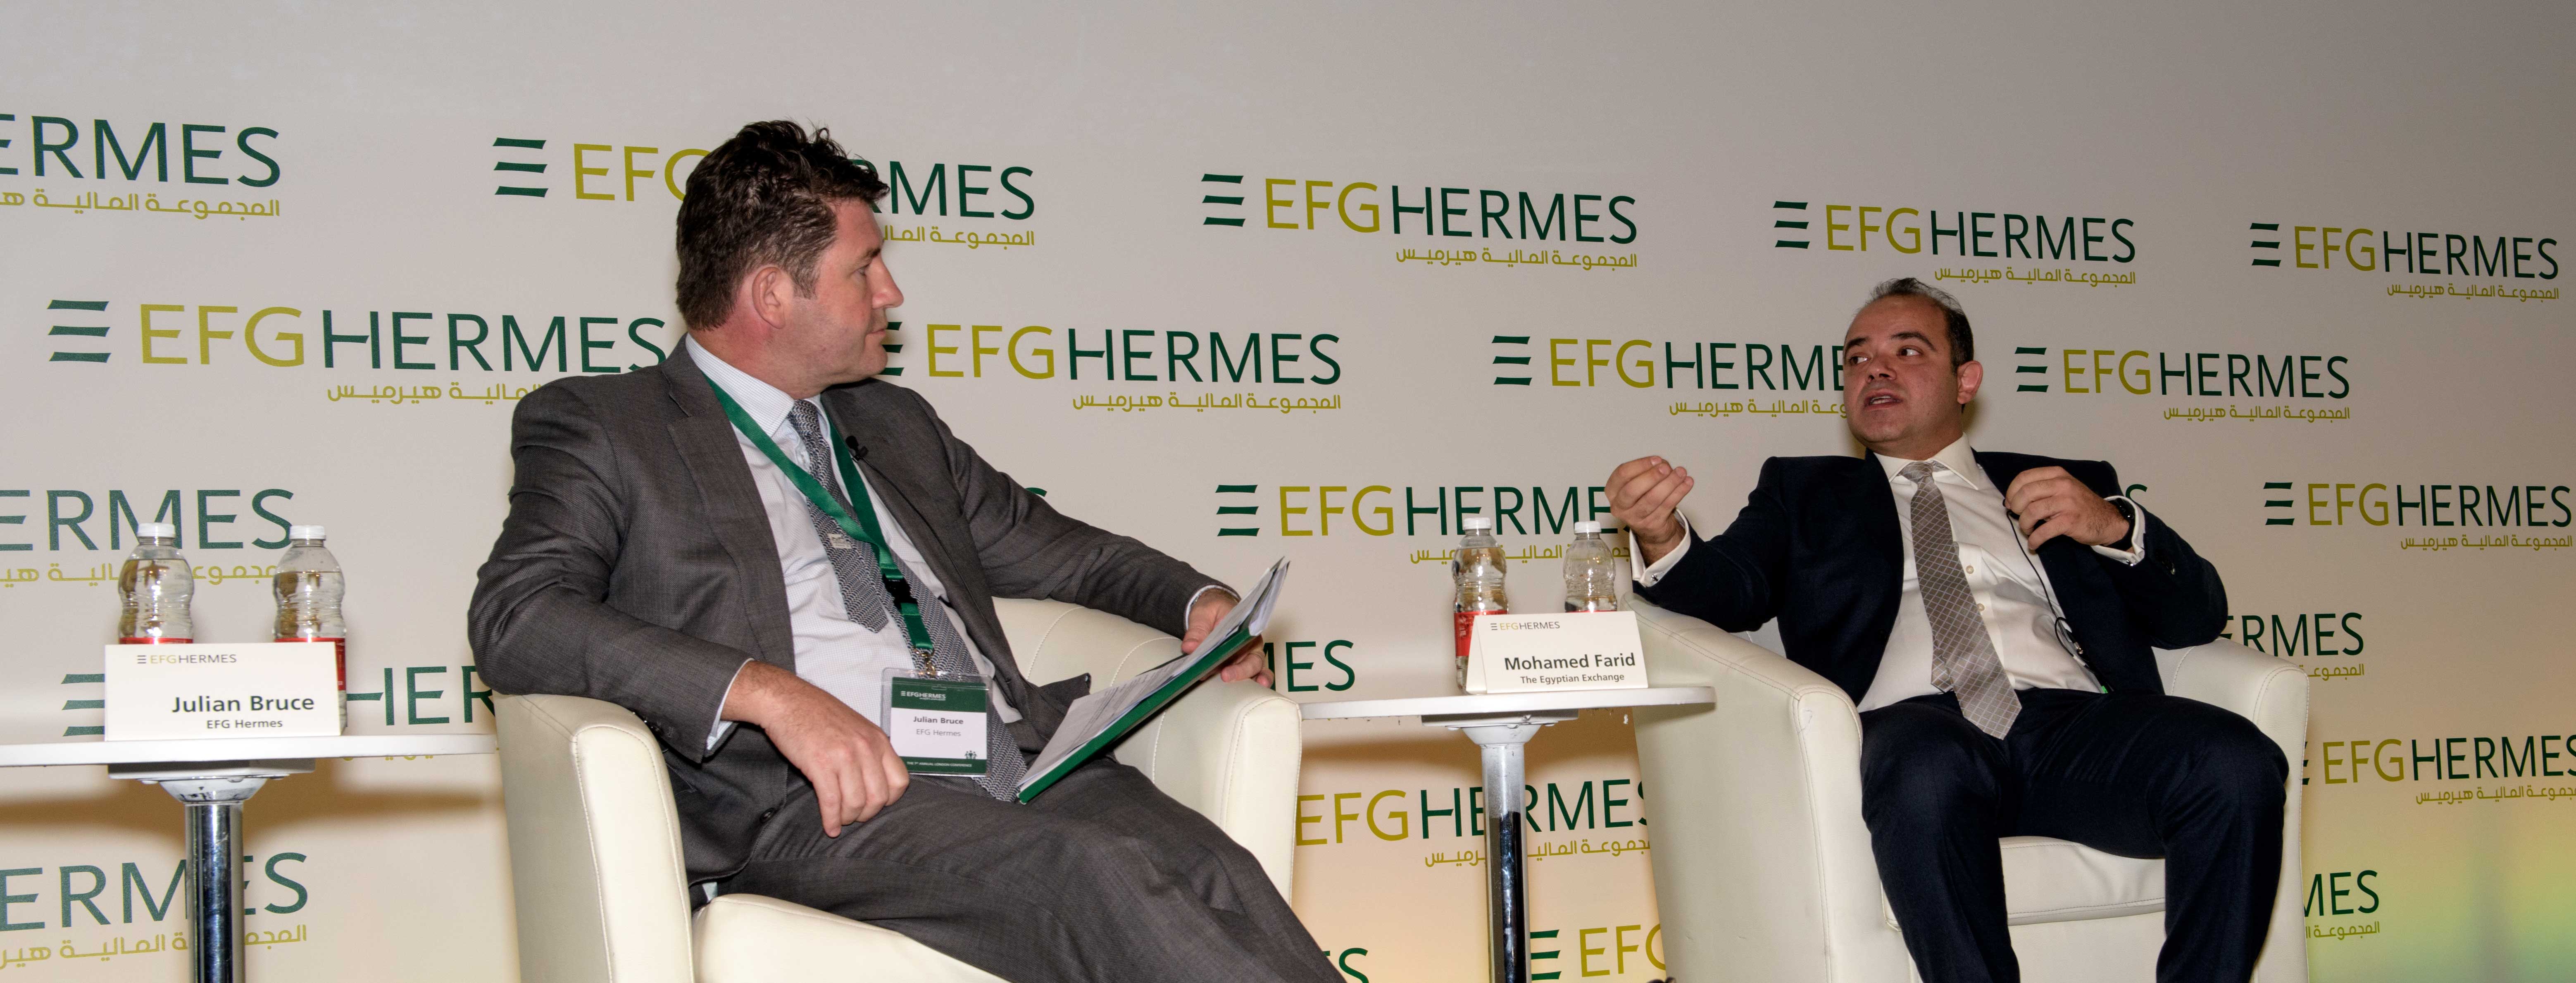 EFG Hermes Annual London Conference: EGX Chairman sets out stall for attracting investment to Egypt